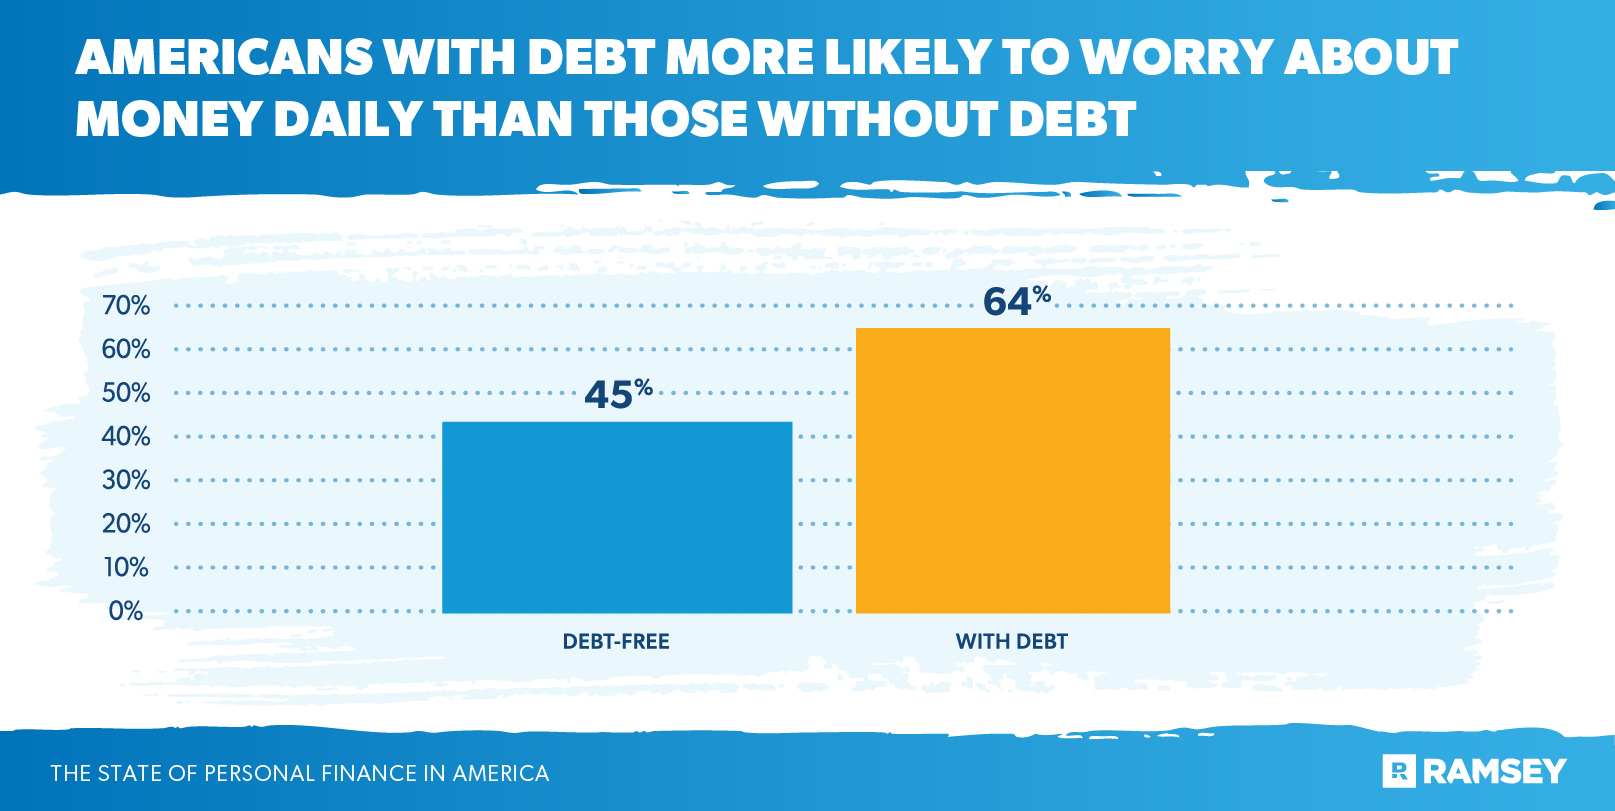 Americans with debt more likely to worry about money daily than those without debt